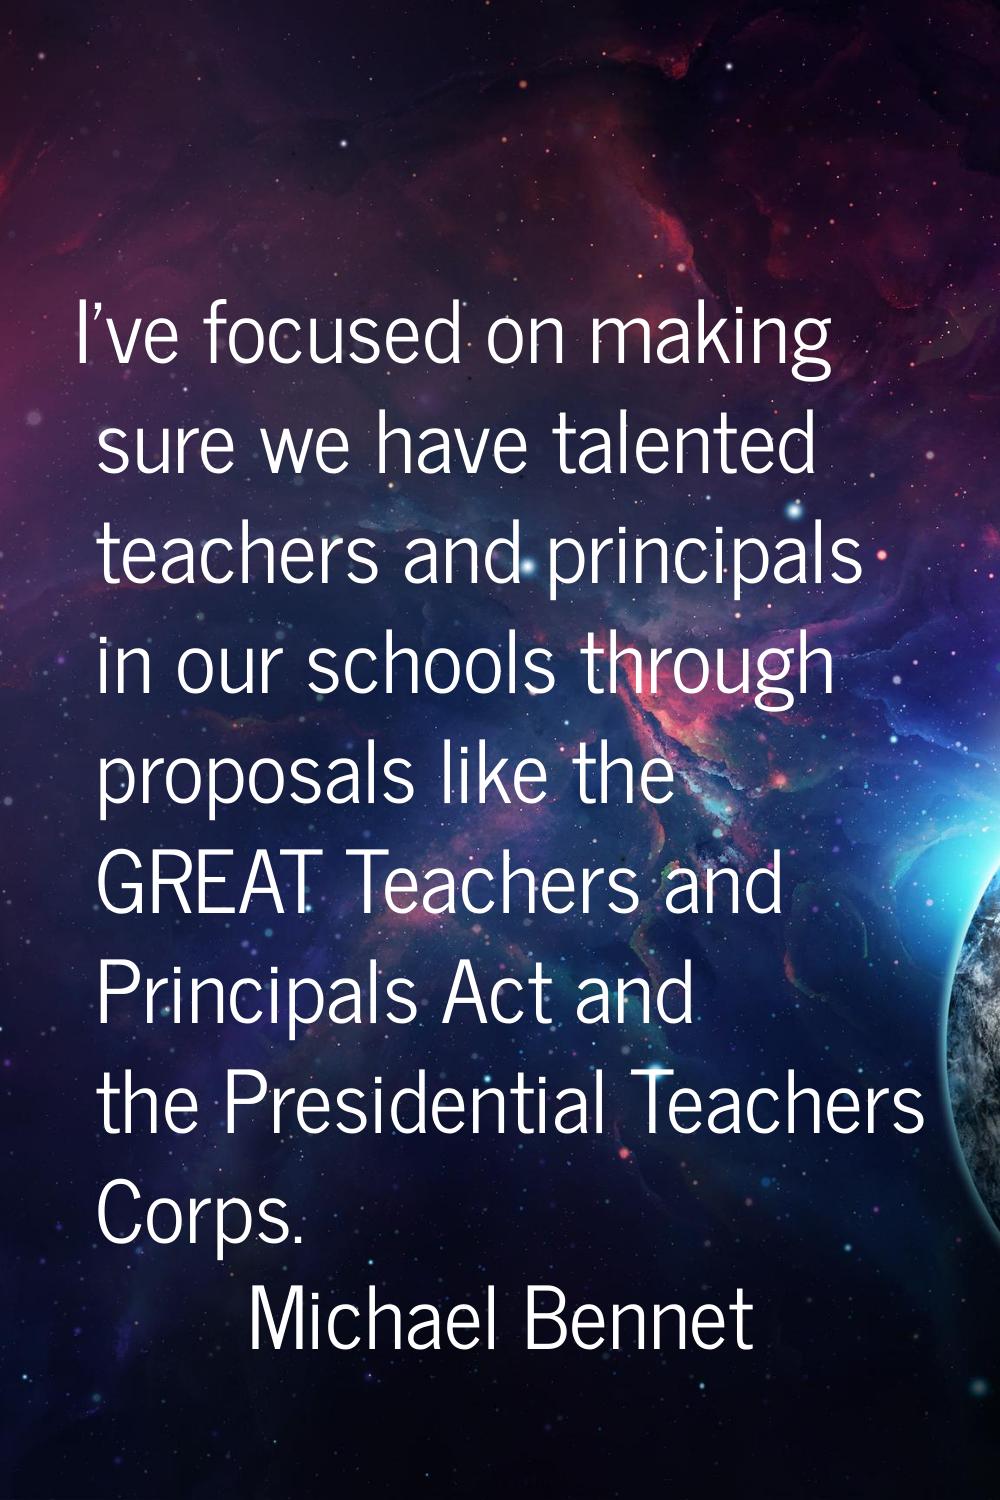 I've focused on making sure we have talented teachers and principals in our schools through proposa